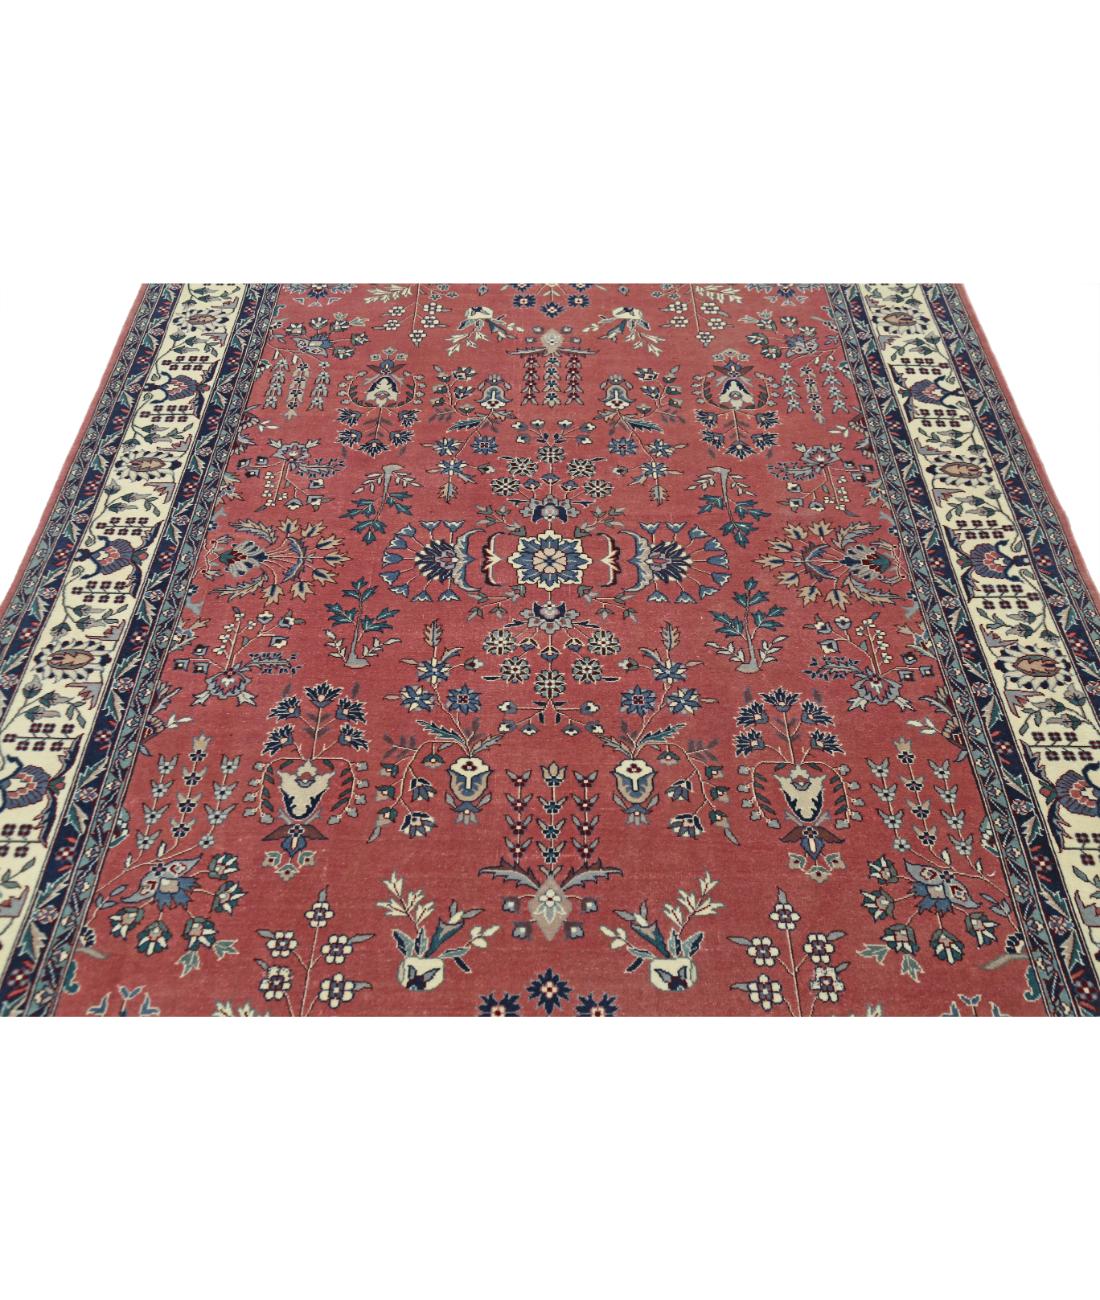 Hand Knotted Heritage Persian Style Wool Rug - 5'11'' x 8'11'' 5' 11" X 8' 11" (180 X 272) / Pink / Ivory